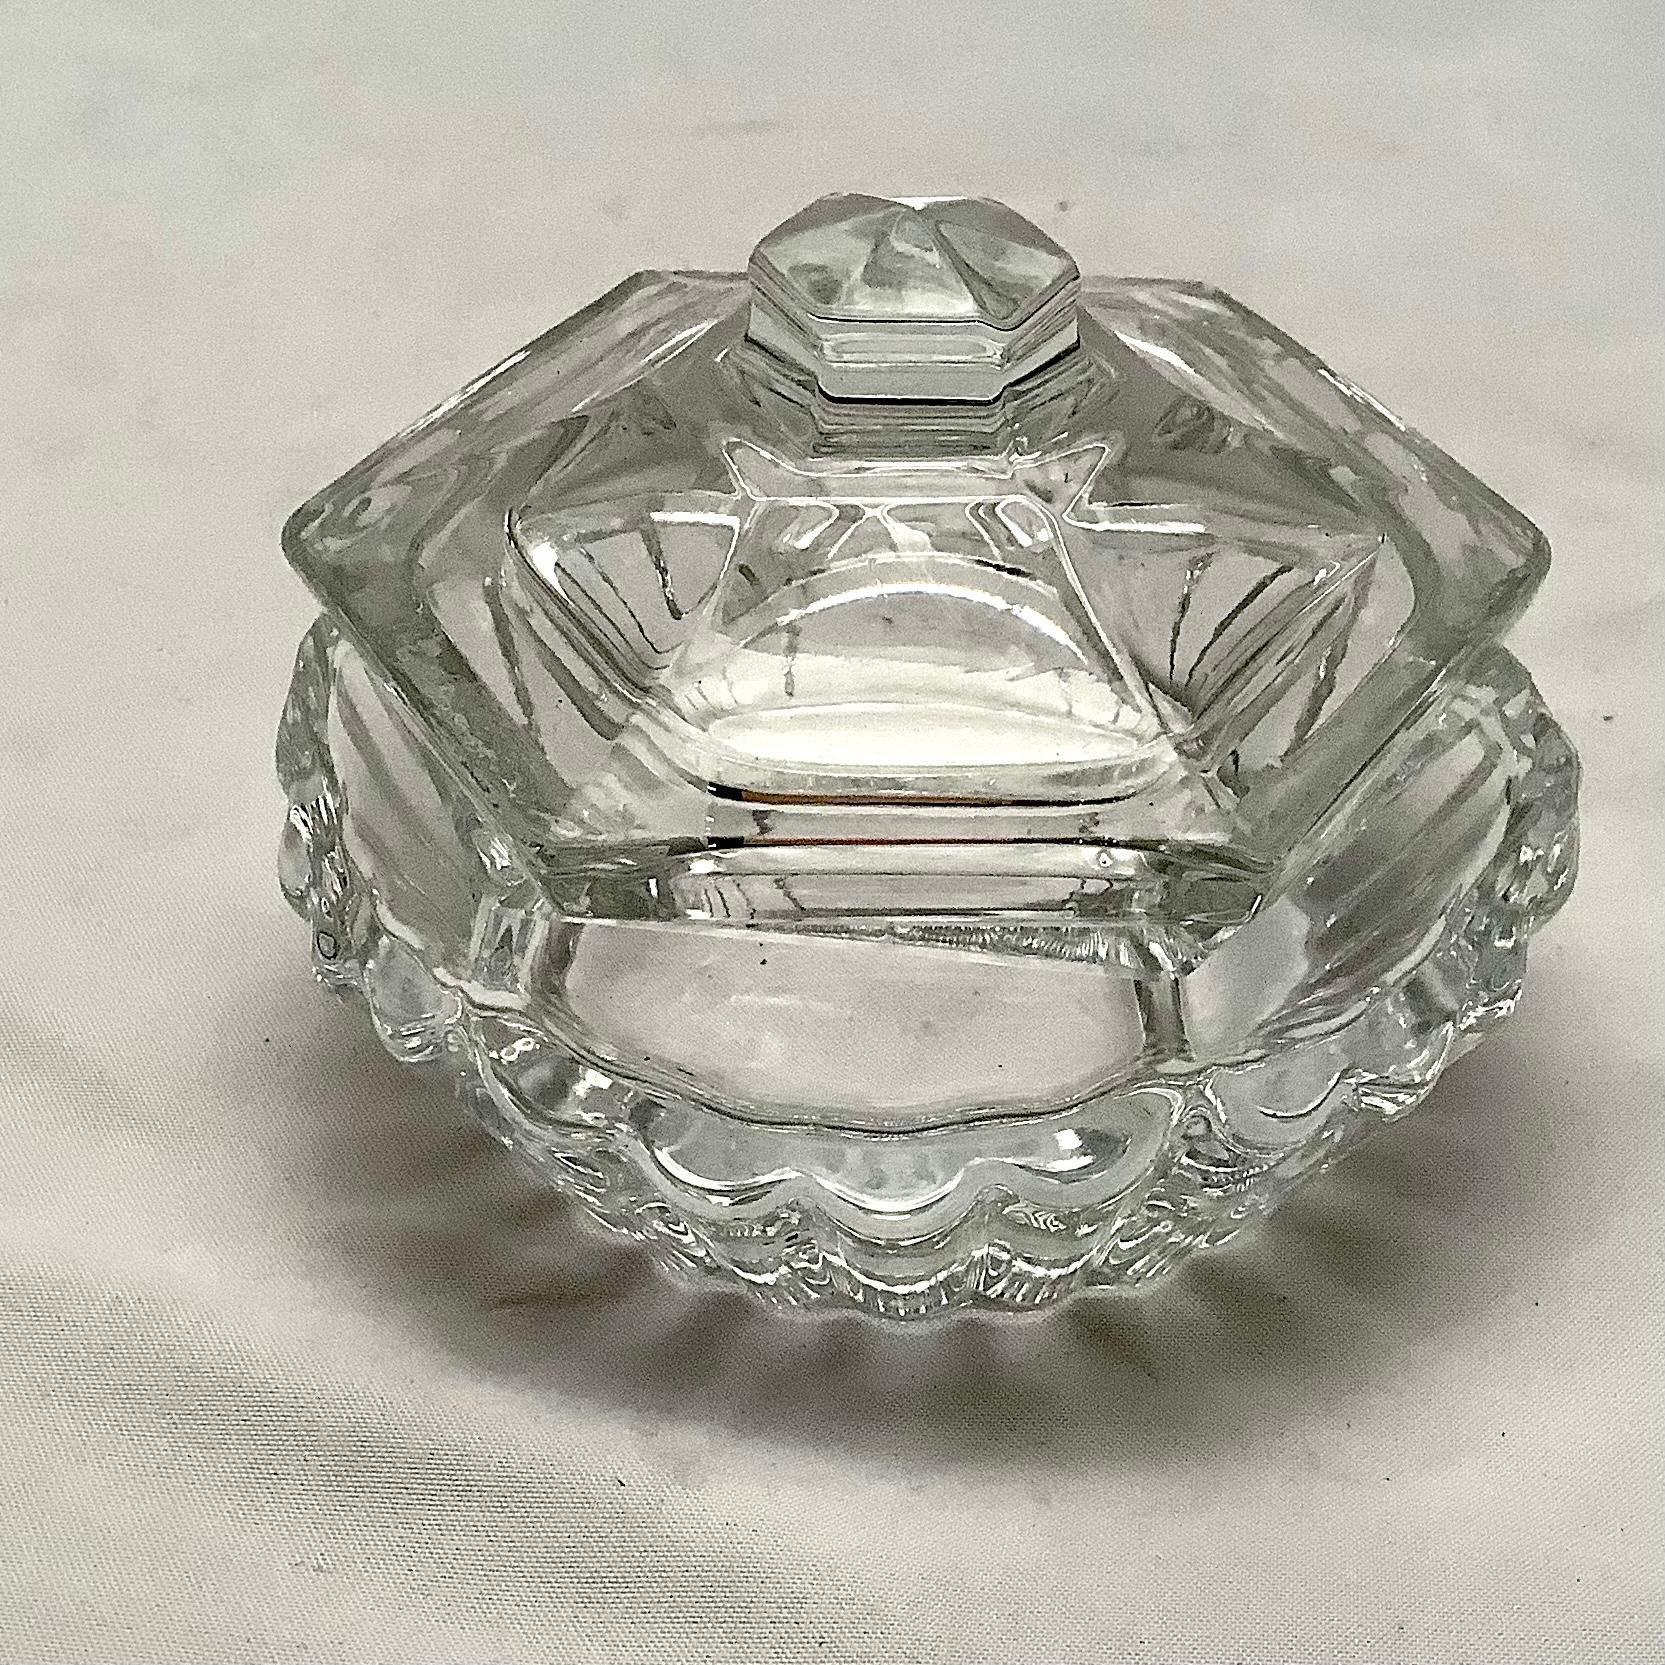 Baccarat crystal covered dish -20th century. The dish is clearly stamped 'Baccarat